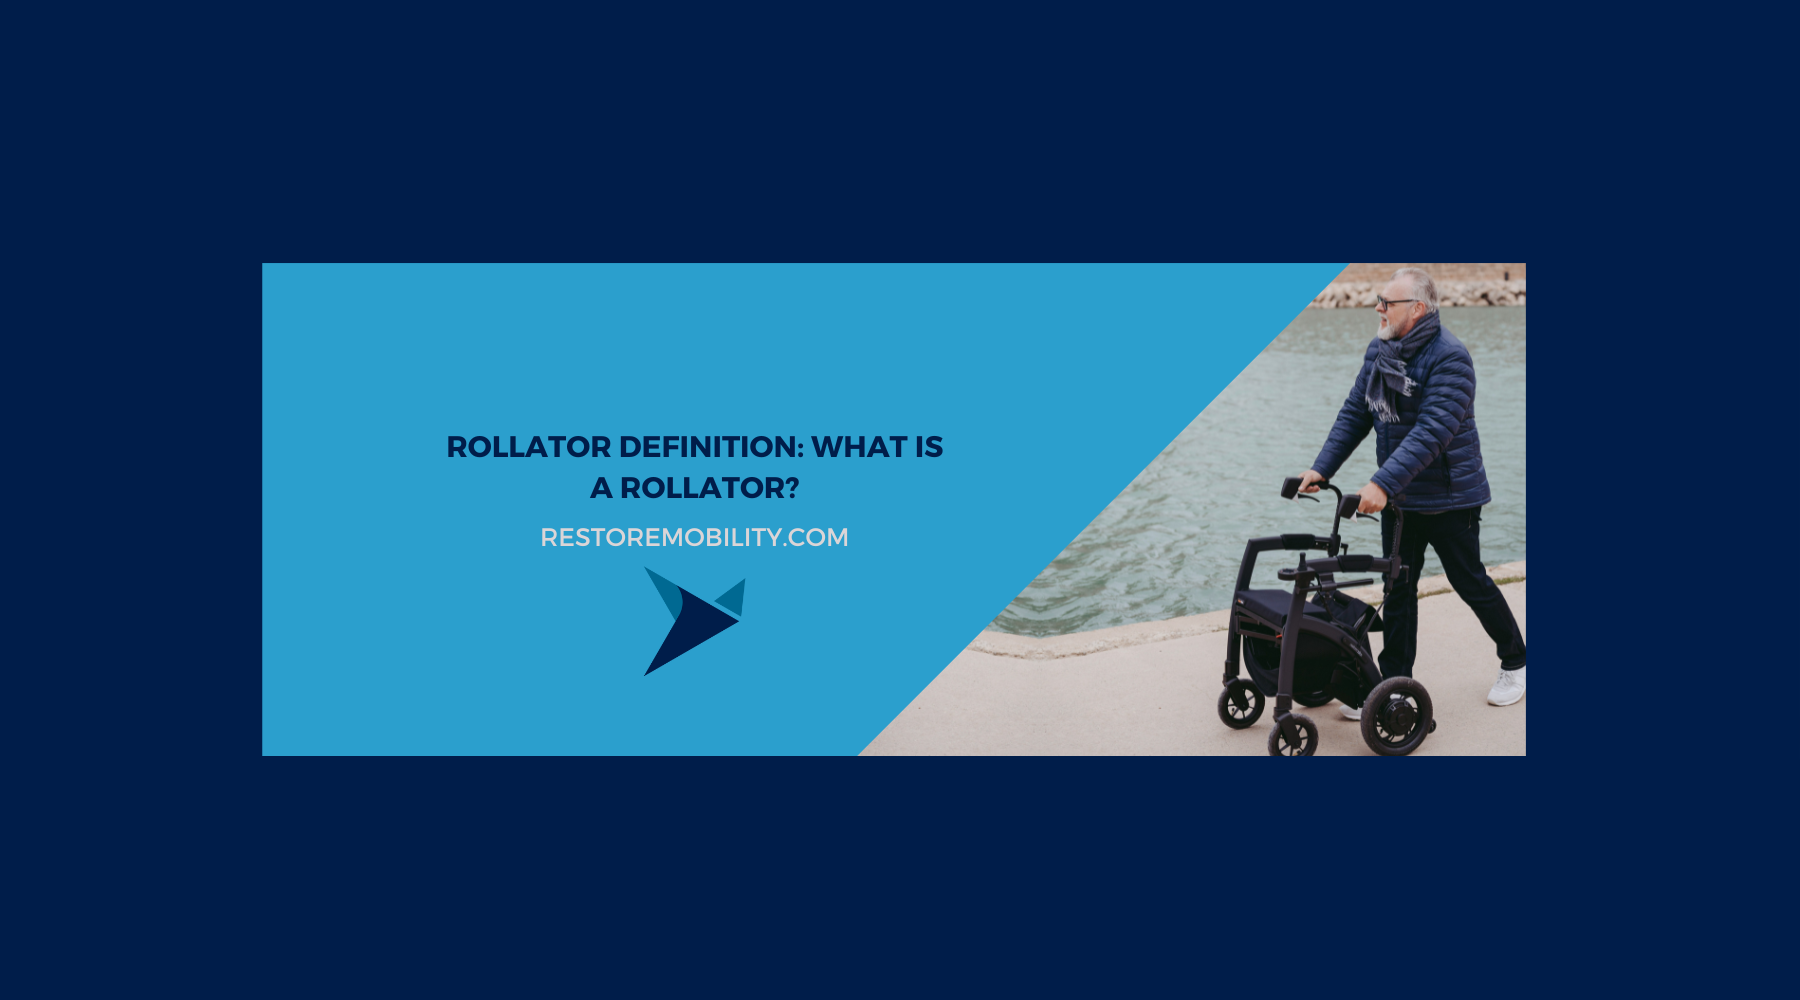 Rollator Definition: What is a Rollator and How Does it Work?